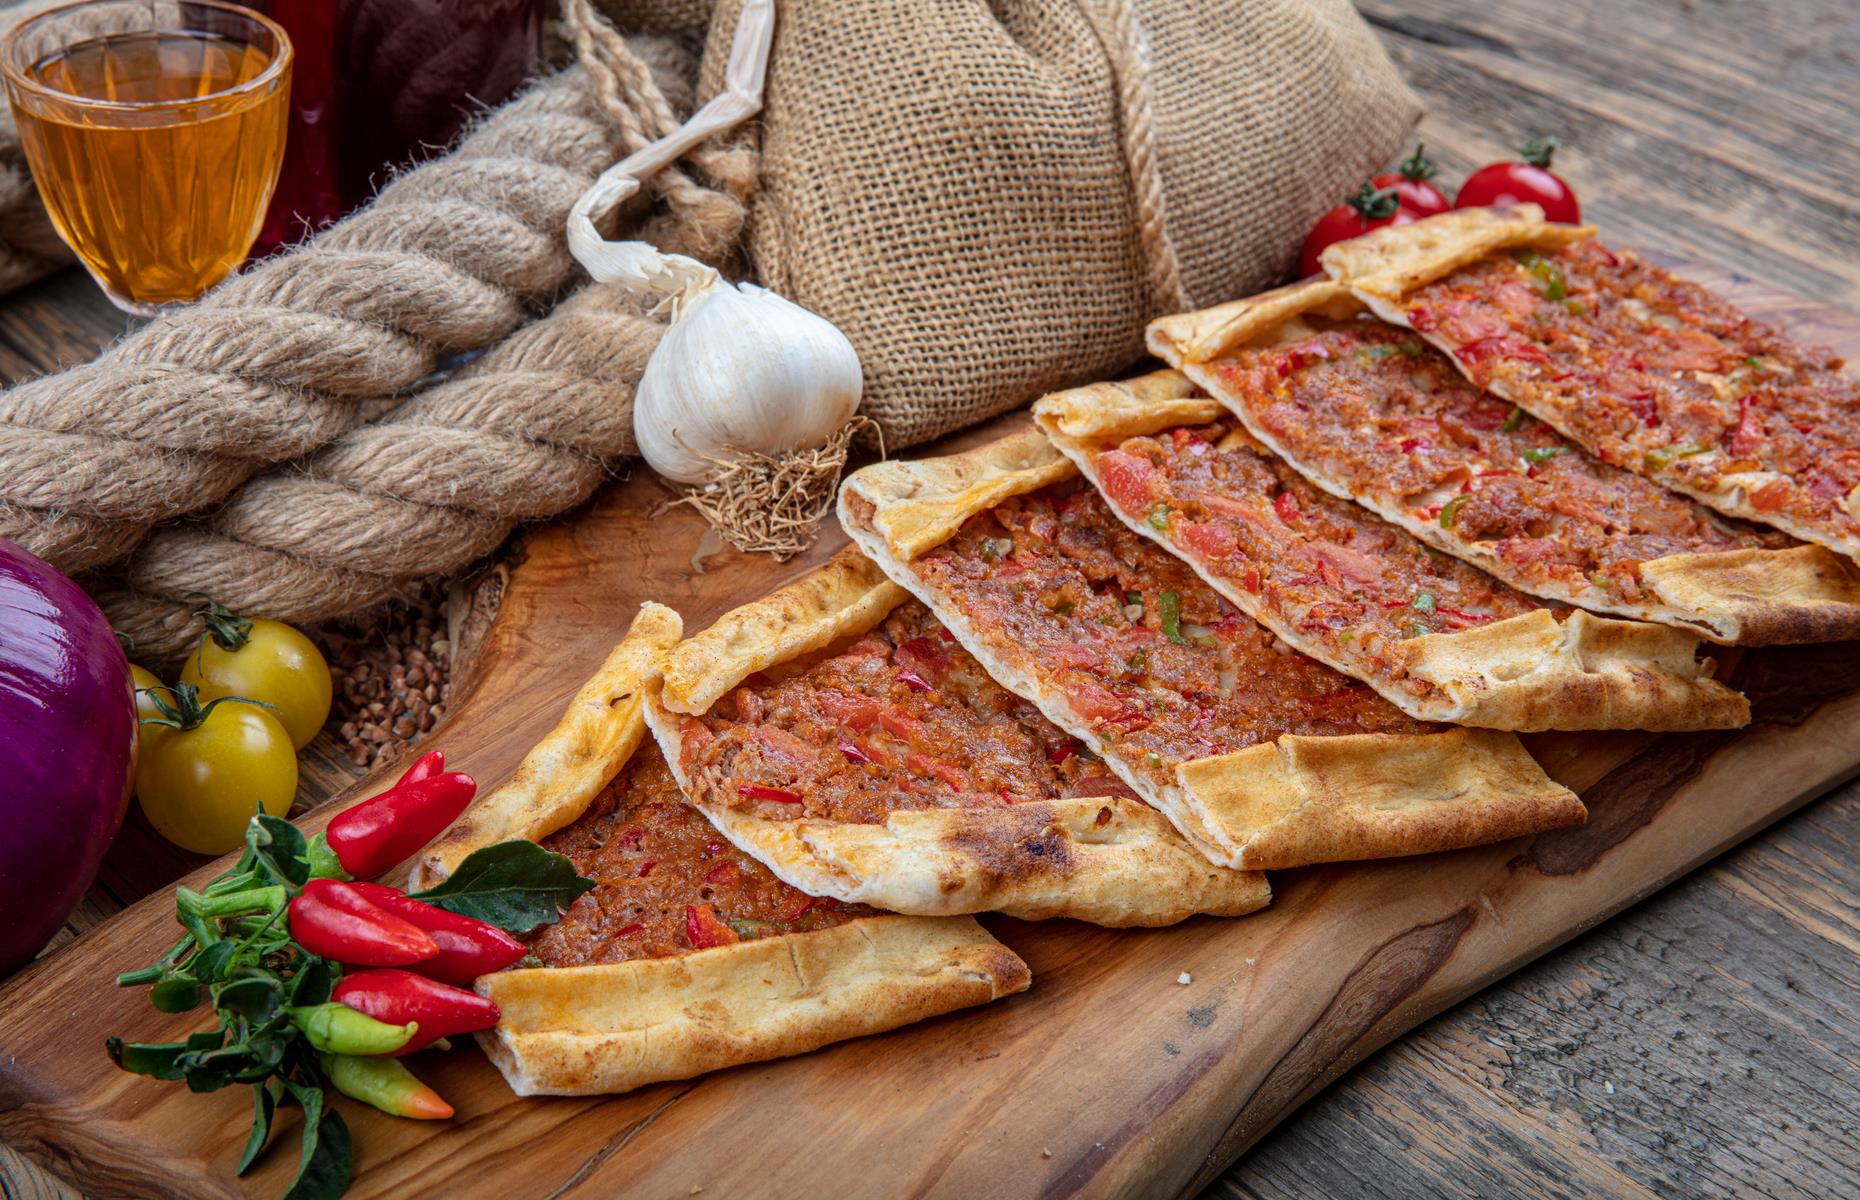 <p>Popular in North Africa and Turkey, these spicy lamb pizzas called pide are often sold as street food. The dough is similar to pizza dough, although it contains oil so the base can be rolled very thinly. The ground lamb is flavored with chili, tomato, garlic and dried mint, which is much more intense than fresh. Traditionally, there's no cheese but it's tasty with some feta crumbled over.</p>  <p><a href="https://www.lovefood.com/recipes/58361/lamb-pizza-lahma-bi-ajeen"><strong>Get the recipe for pide here</strong></a></p>